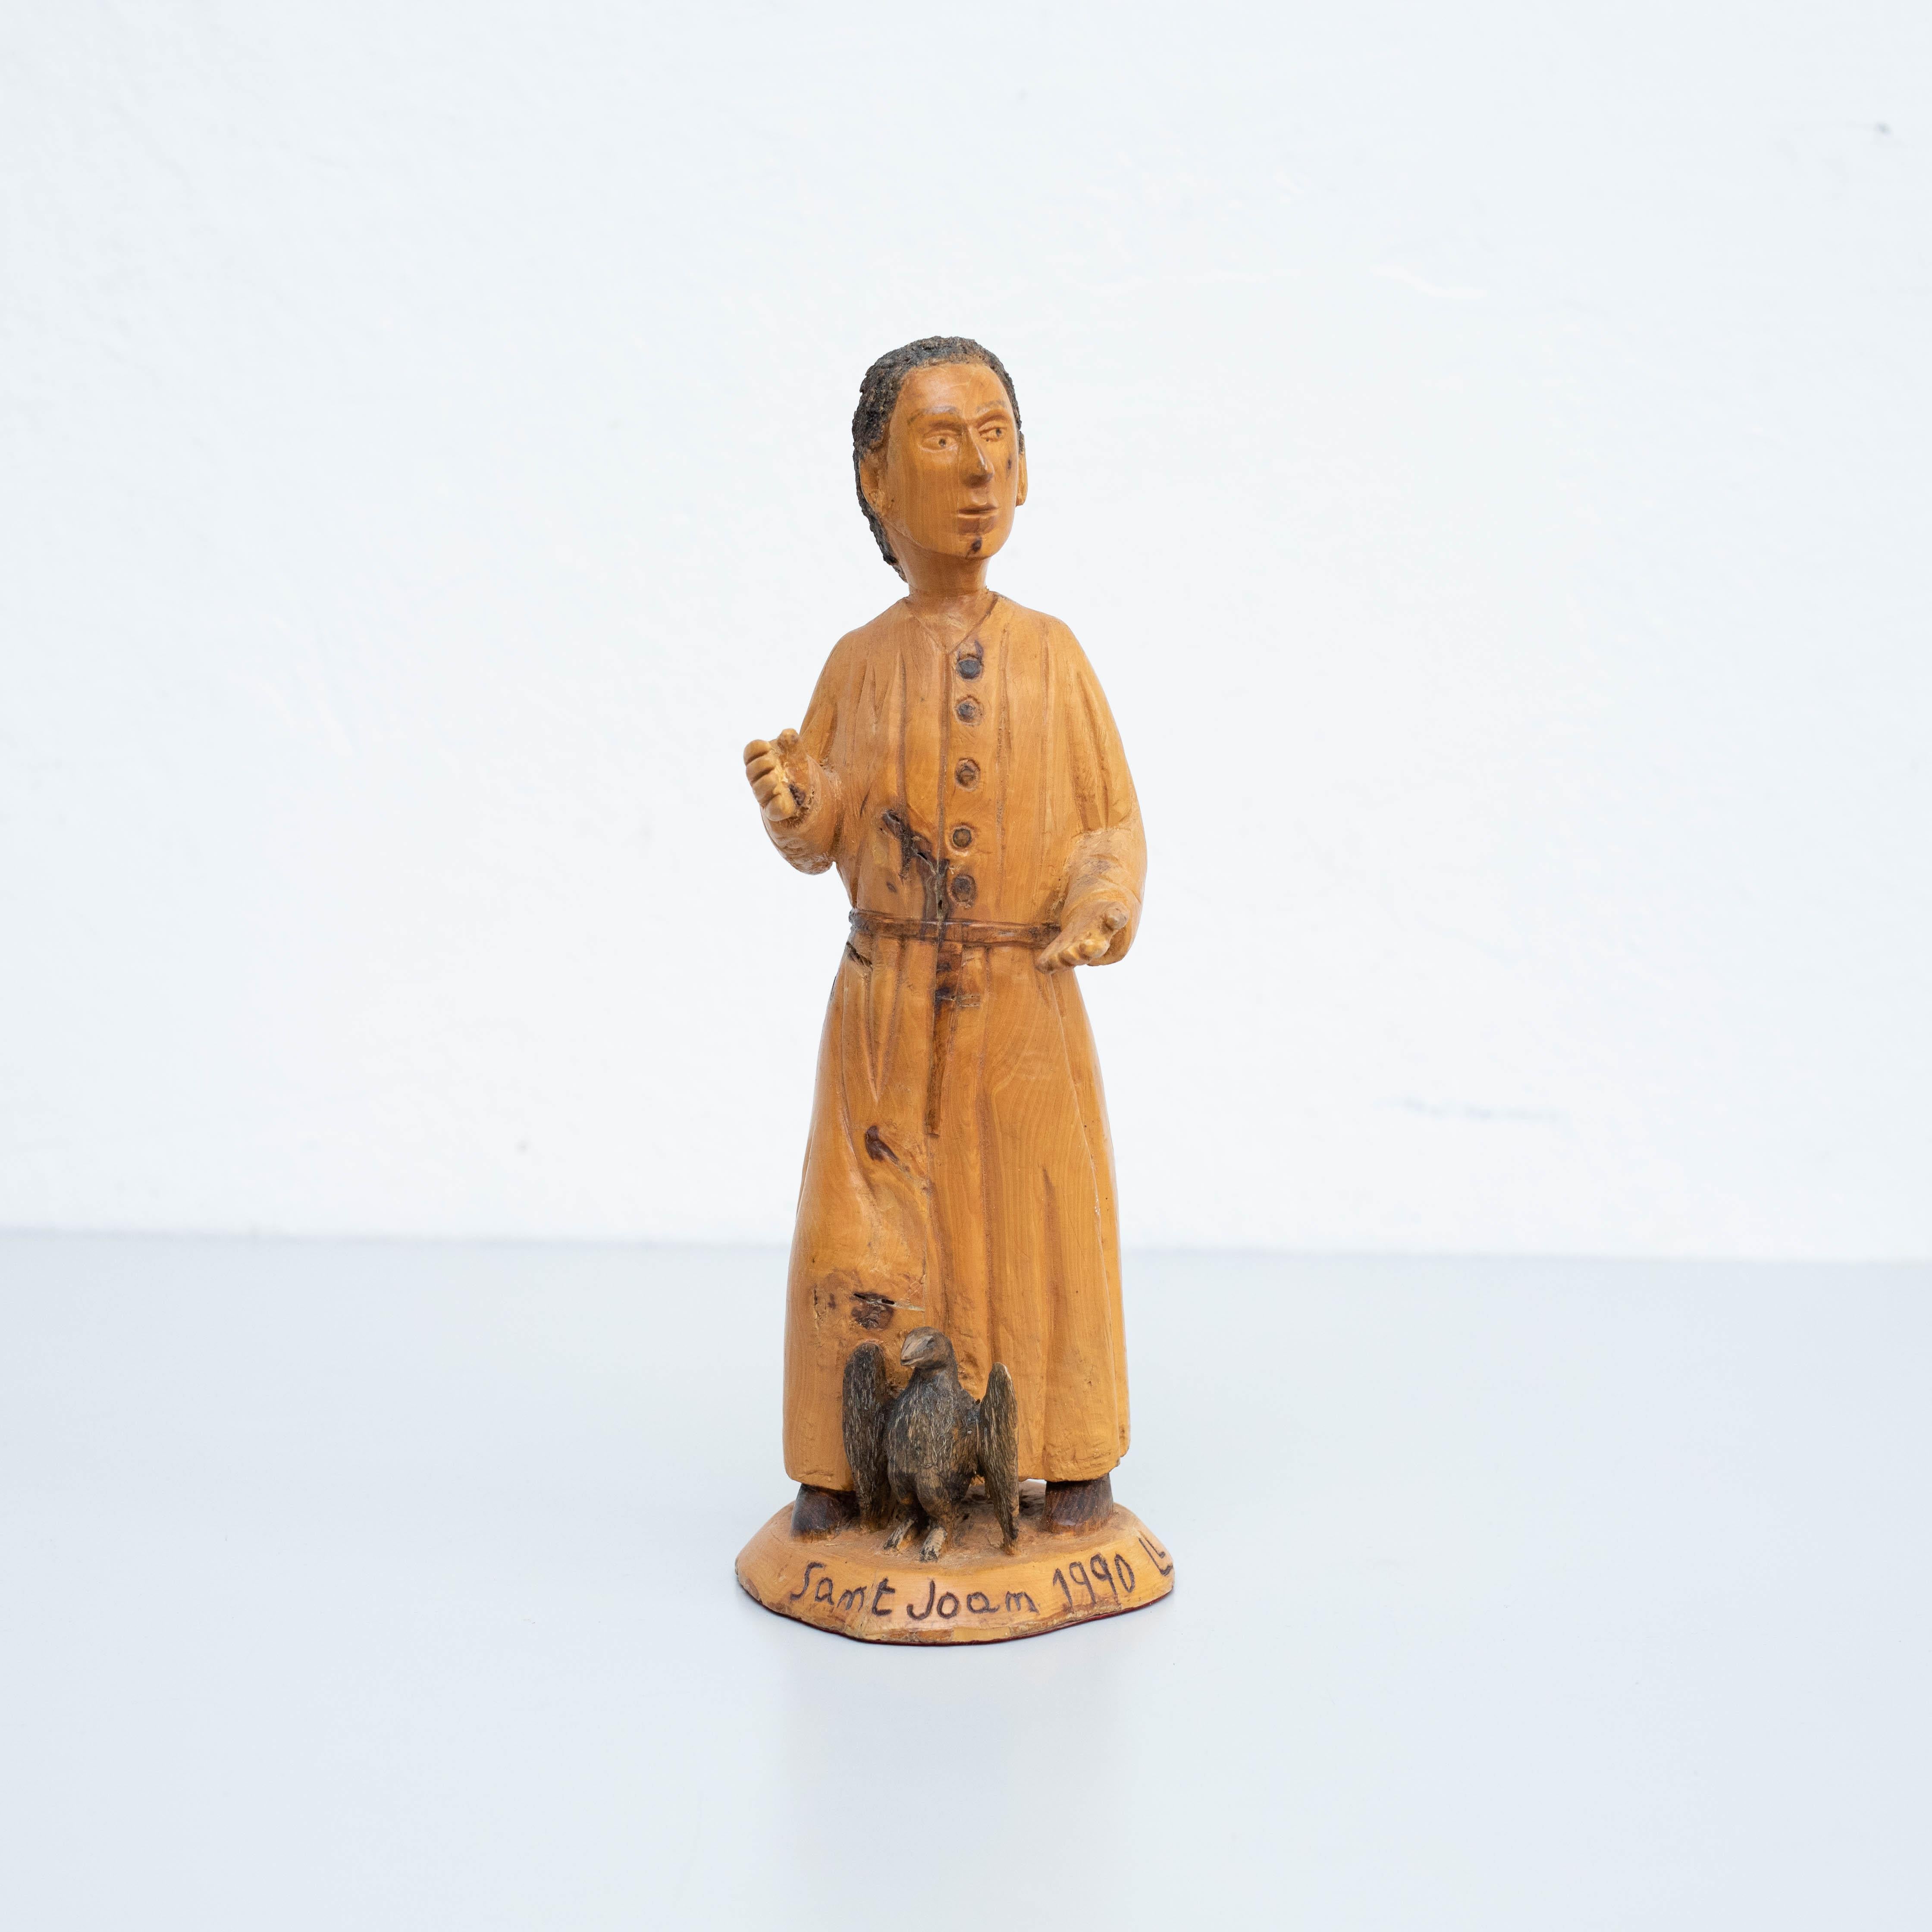 Traditional wooden Pastoral Art Saint Joan Sculpture.
Handmade in the Catalan Pyrenees, 1990.

Signed by Ll.Pujol

In original condition, with minor wear consistent with age and use, preserving a beautiful patina.

Materials:
Wood.